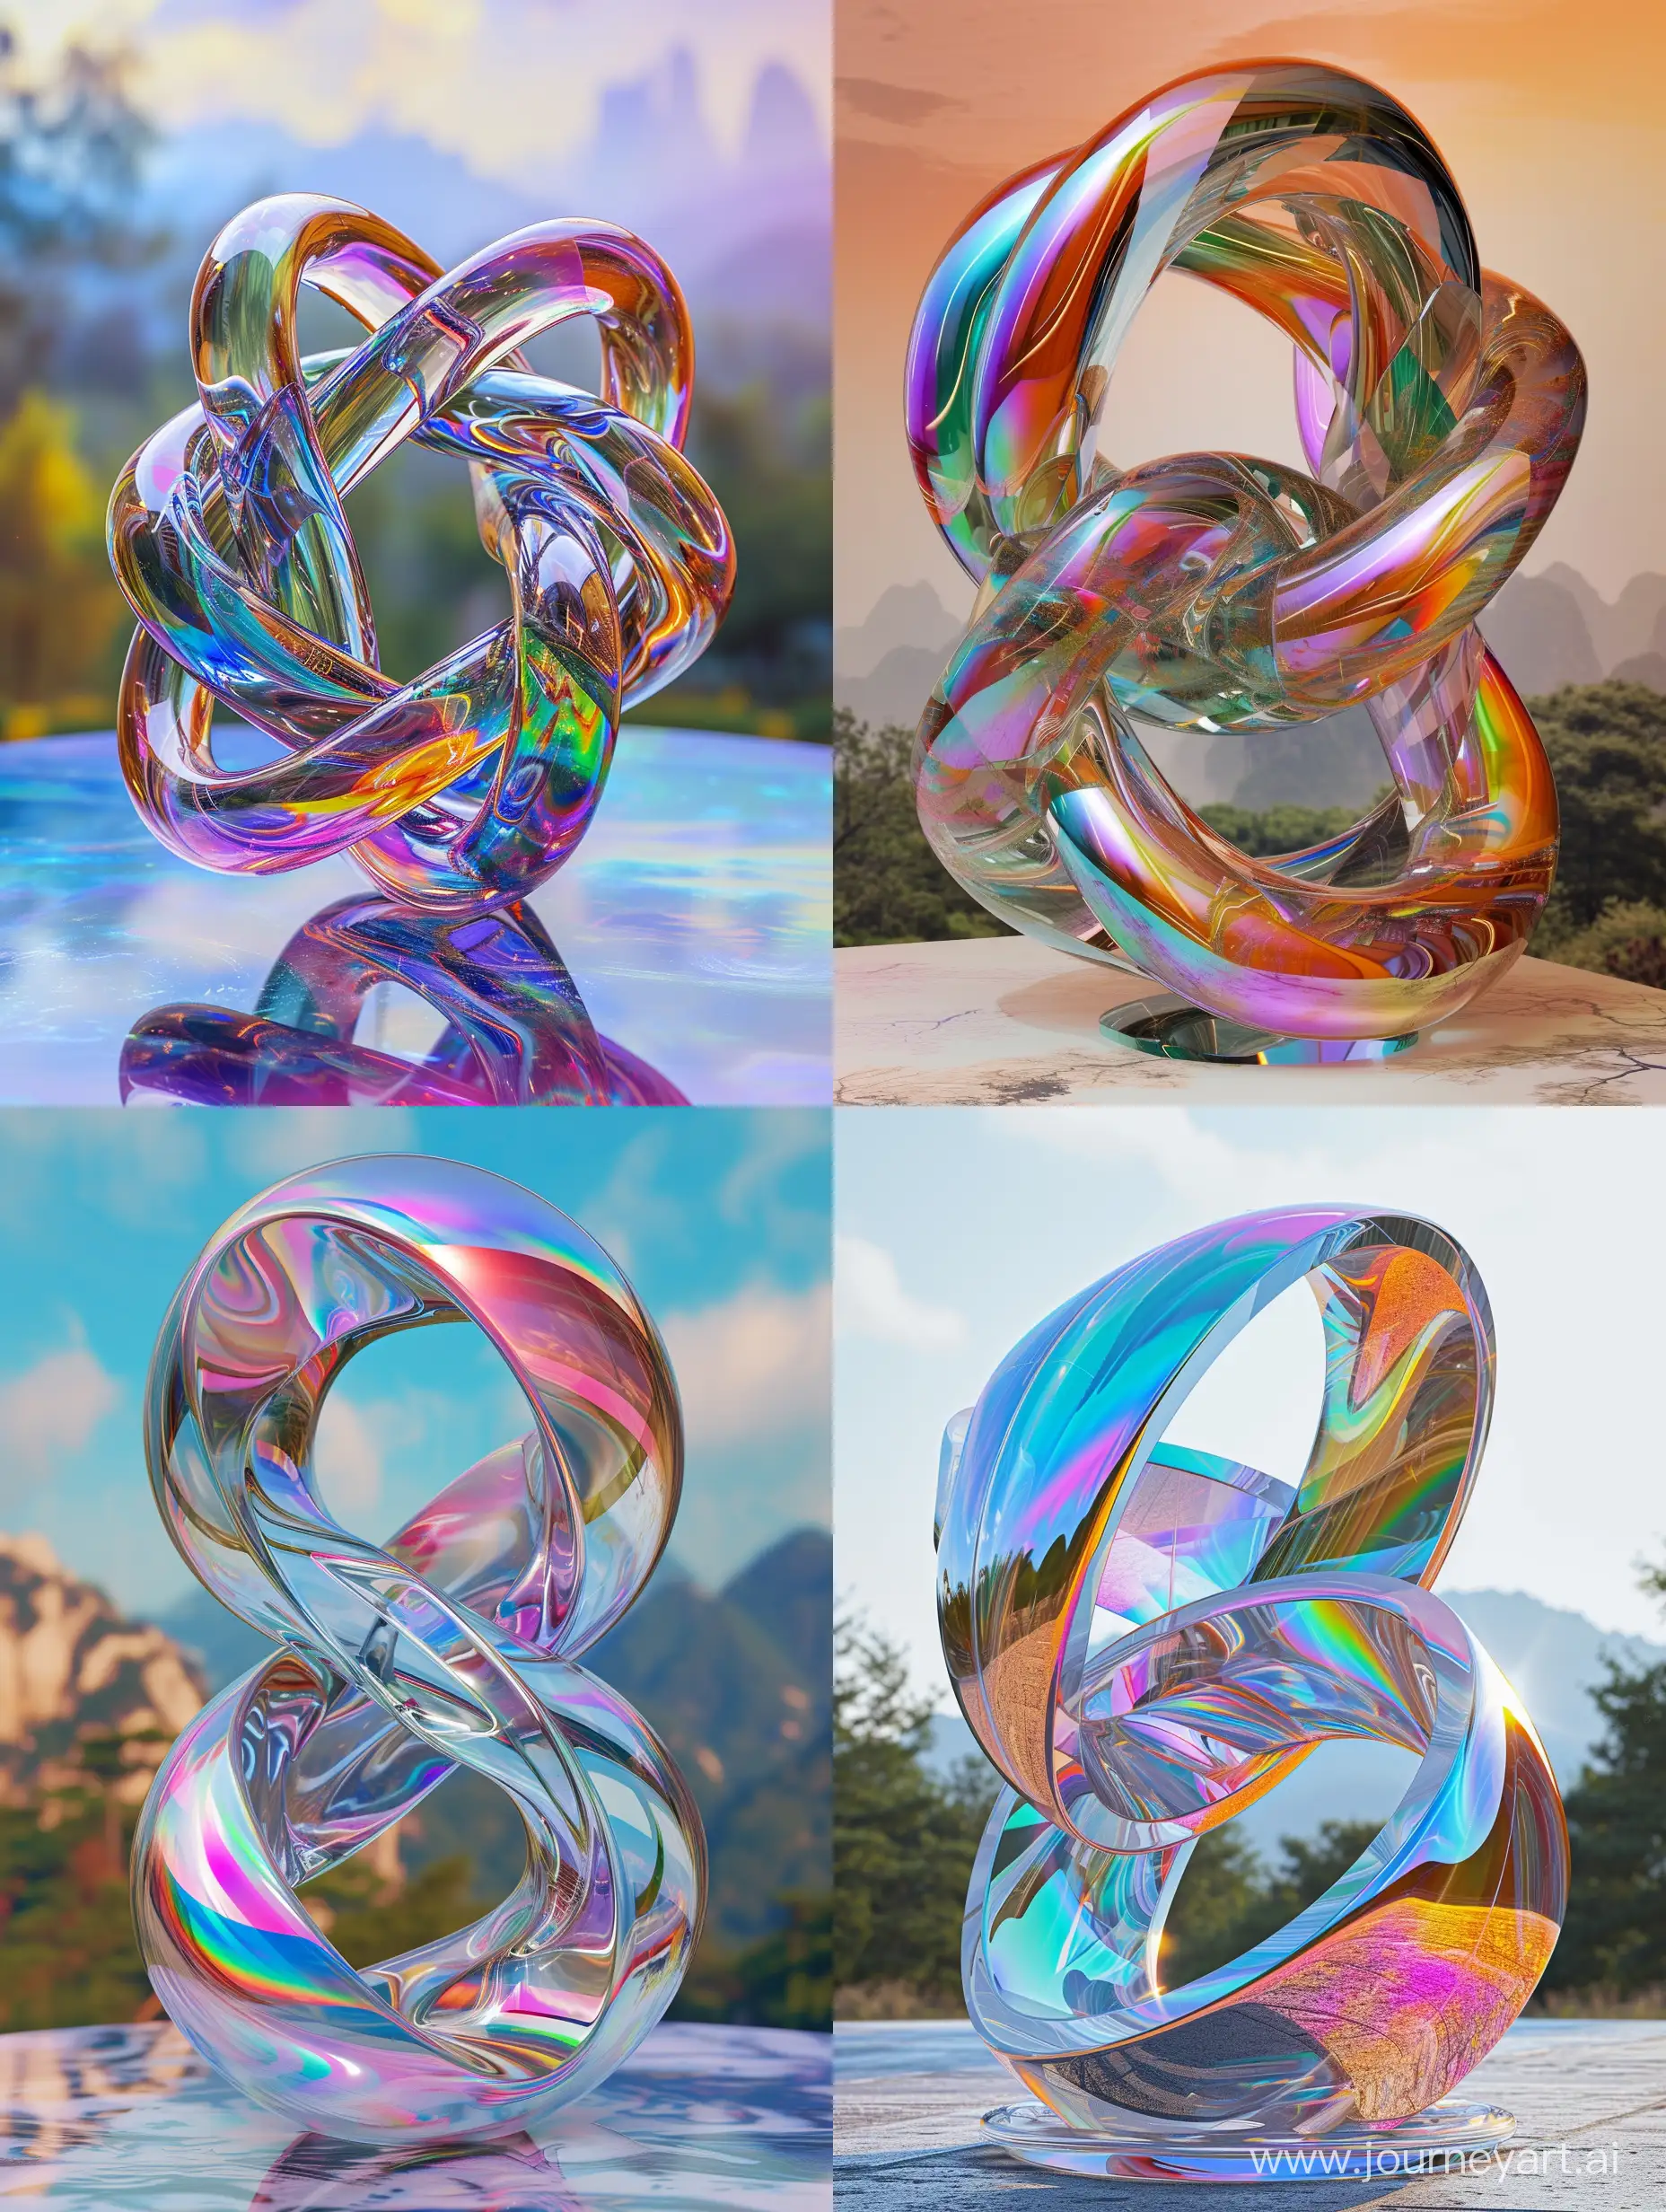 Iridescent-Glass-Geometric-Sculpture-with-Vibrant-Loops-on-Chinese-Landscape-Background